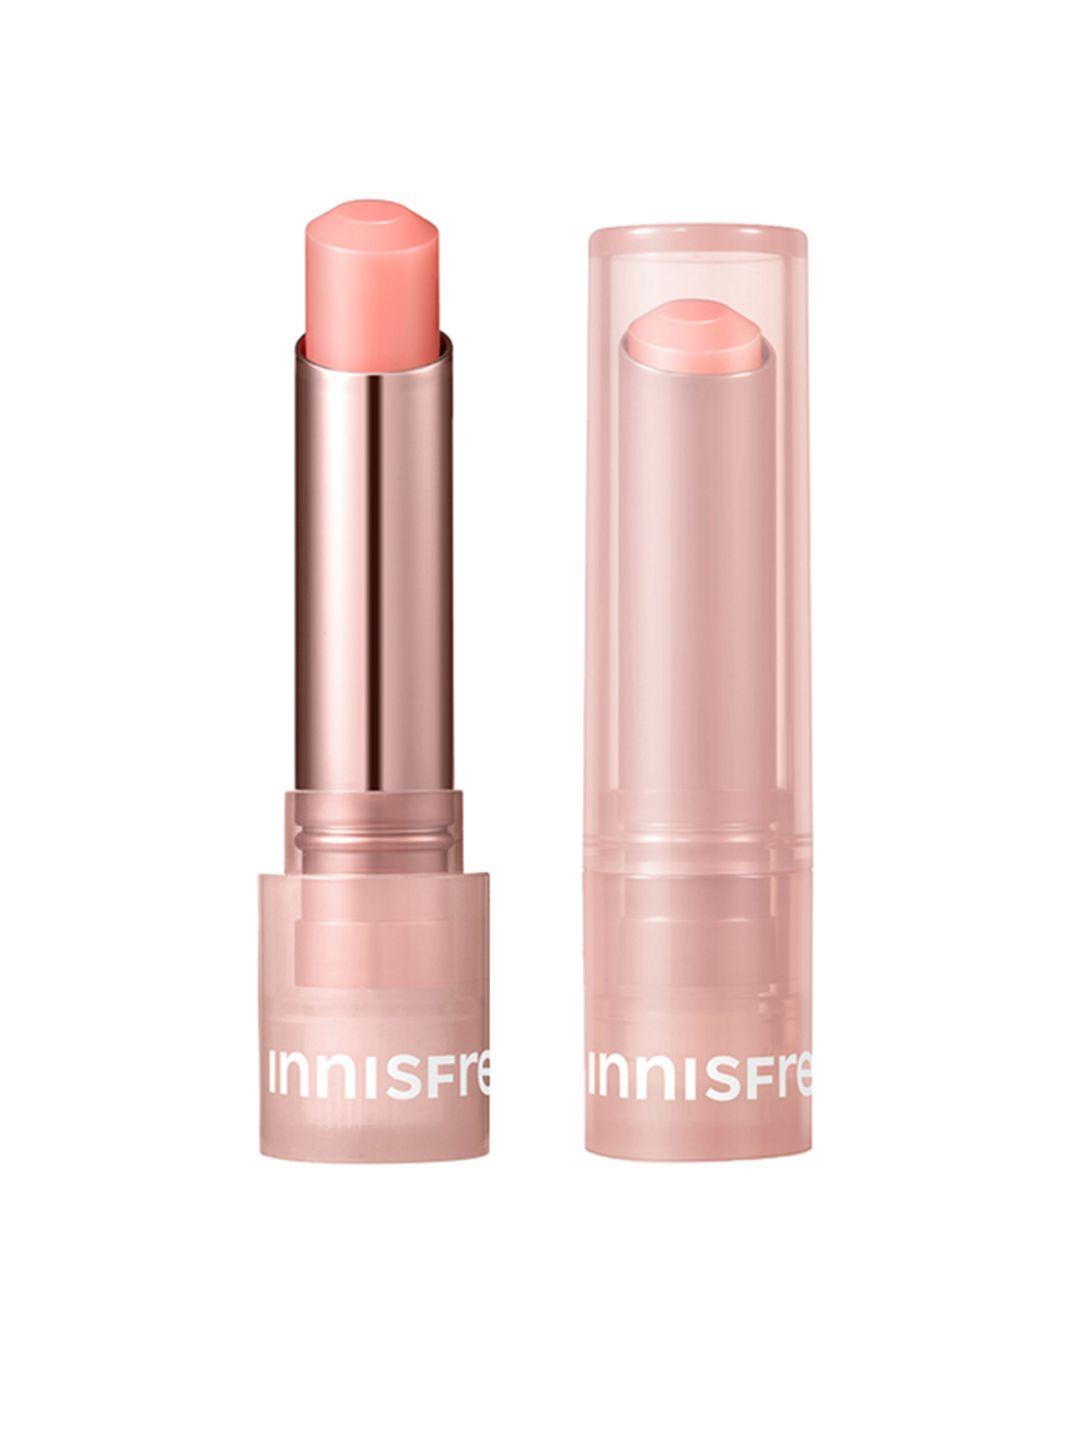 innisfree-dewy-tint-lip-balm-with-jeju-camelia-seed-oil-&-hyaluronic-acid---baby-pink-1